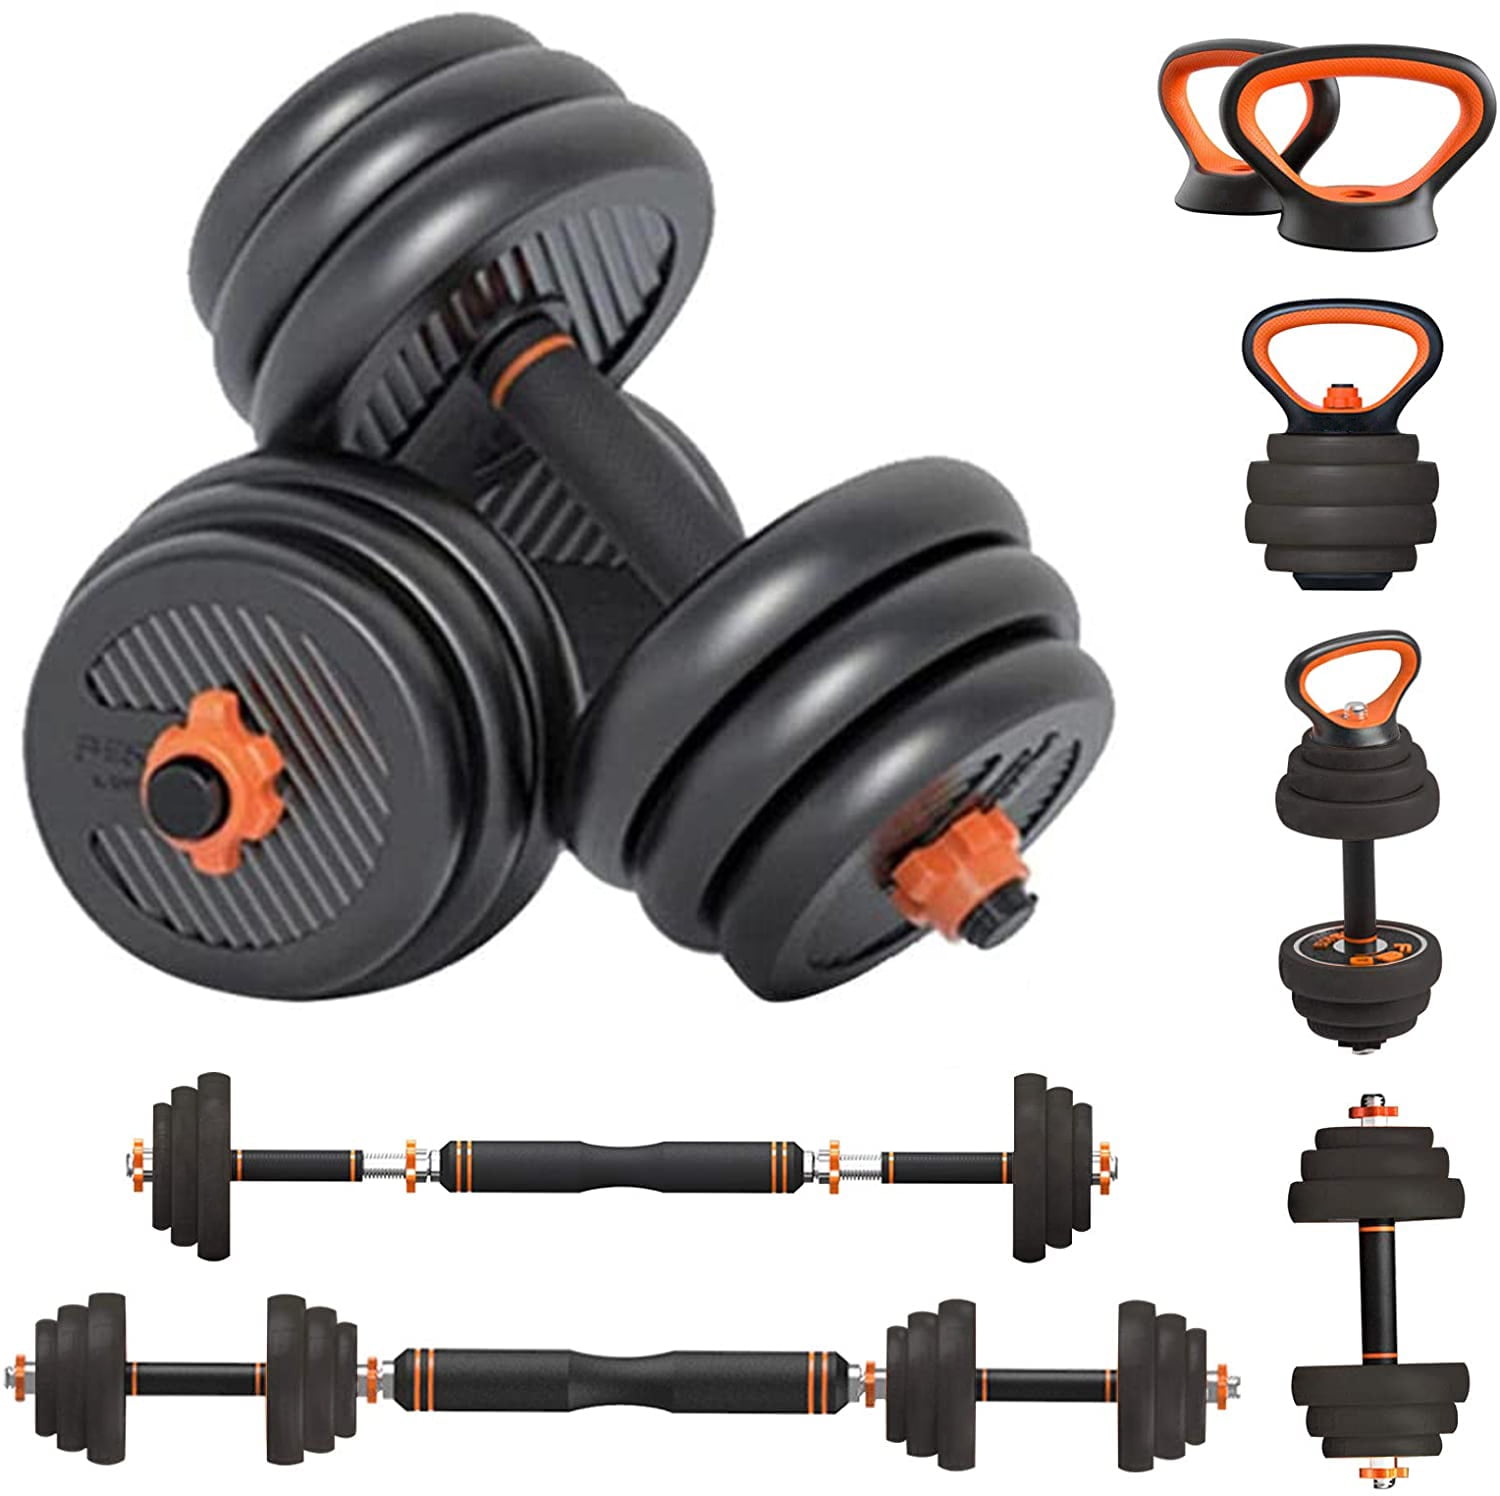 2-in-1 Barbell & Dumbbell Set Gym Body Building 10-20KG Weights Plates Home Gym 